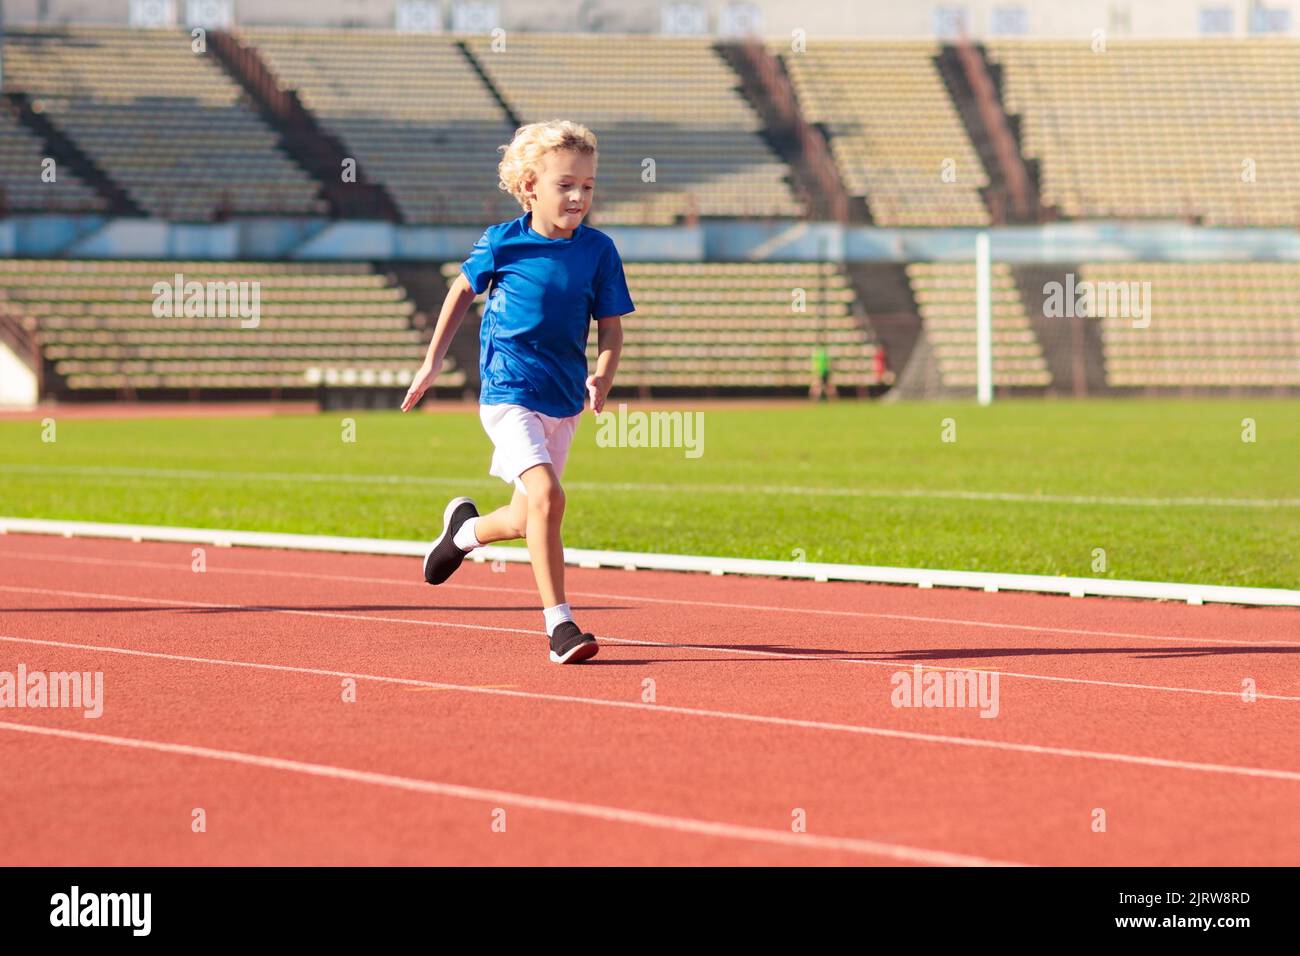 Fitness Athletic Girl Preparing For A Run On Sport Track At Stadium.  Healthy And Sporty Lifestyle With Young Girl Running Stock Photo, Picture  and Royalty Free Image. Image 39507034.